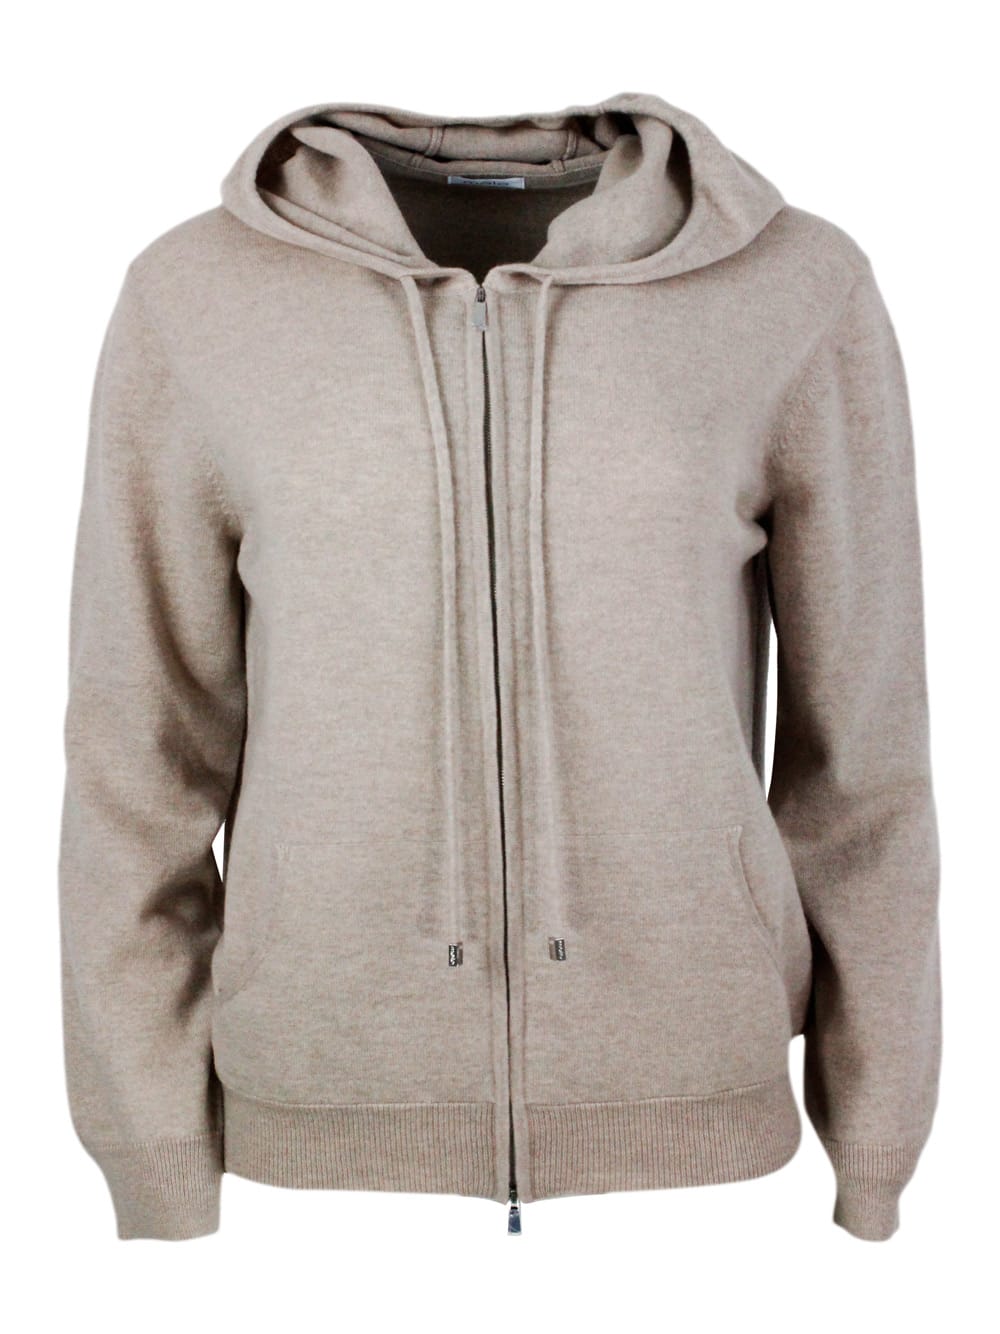 Sweatshirt Style Sweater In Pure And Soft Cashmere With Hood And Zip Closure